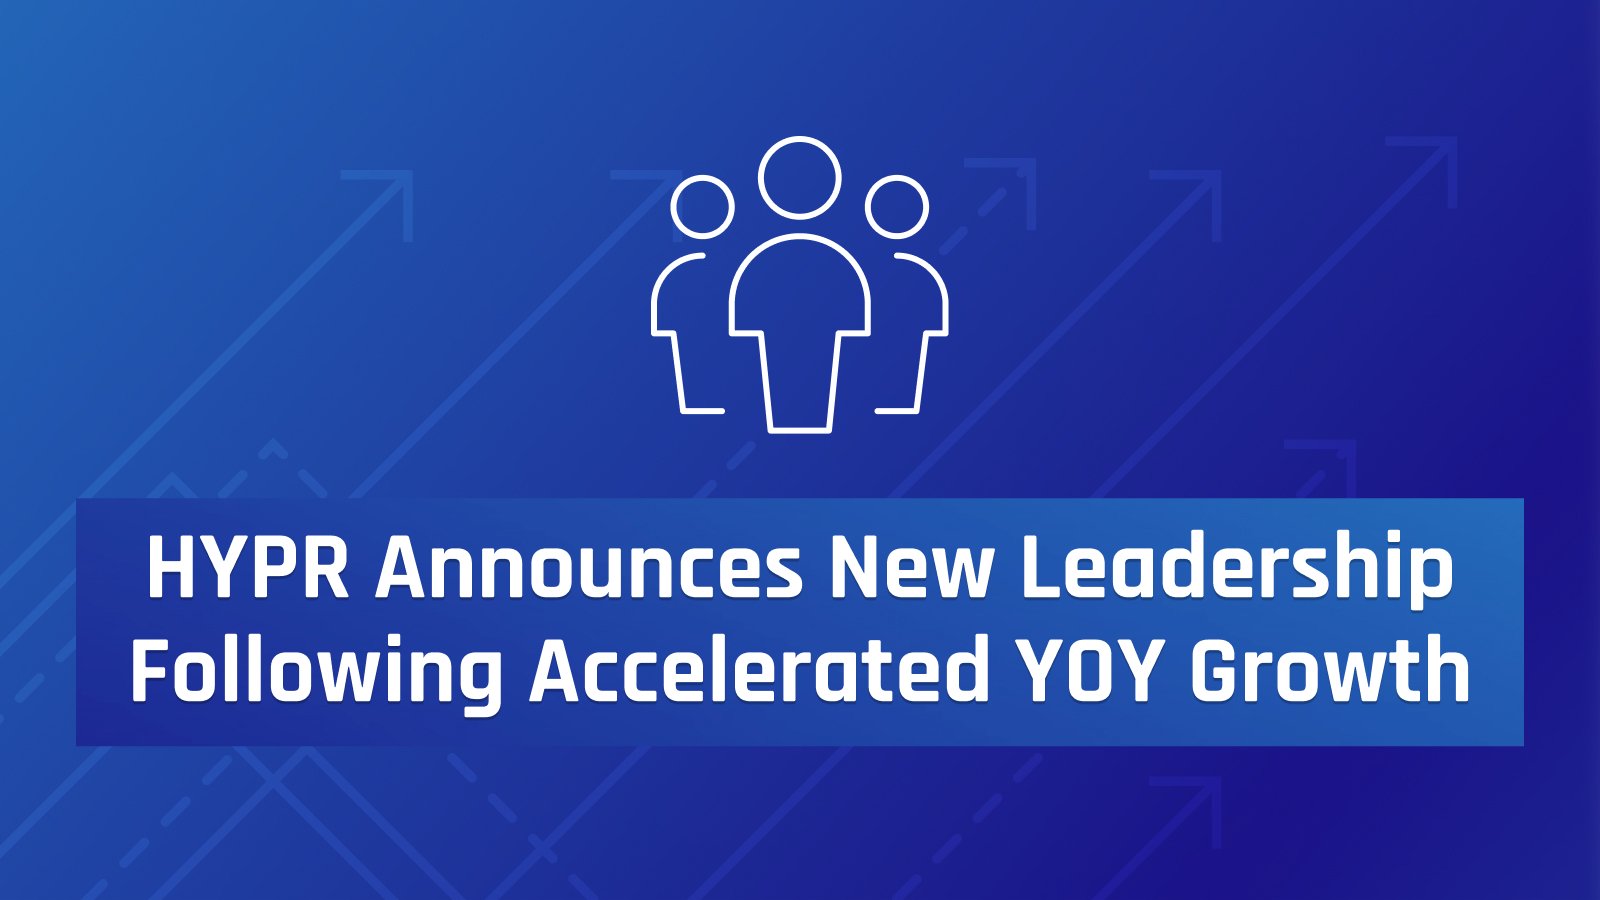 HYPR Announces New Leadership Appointments Following Accelerated YOY Growth